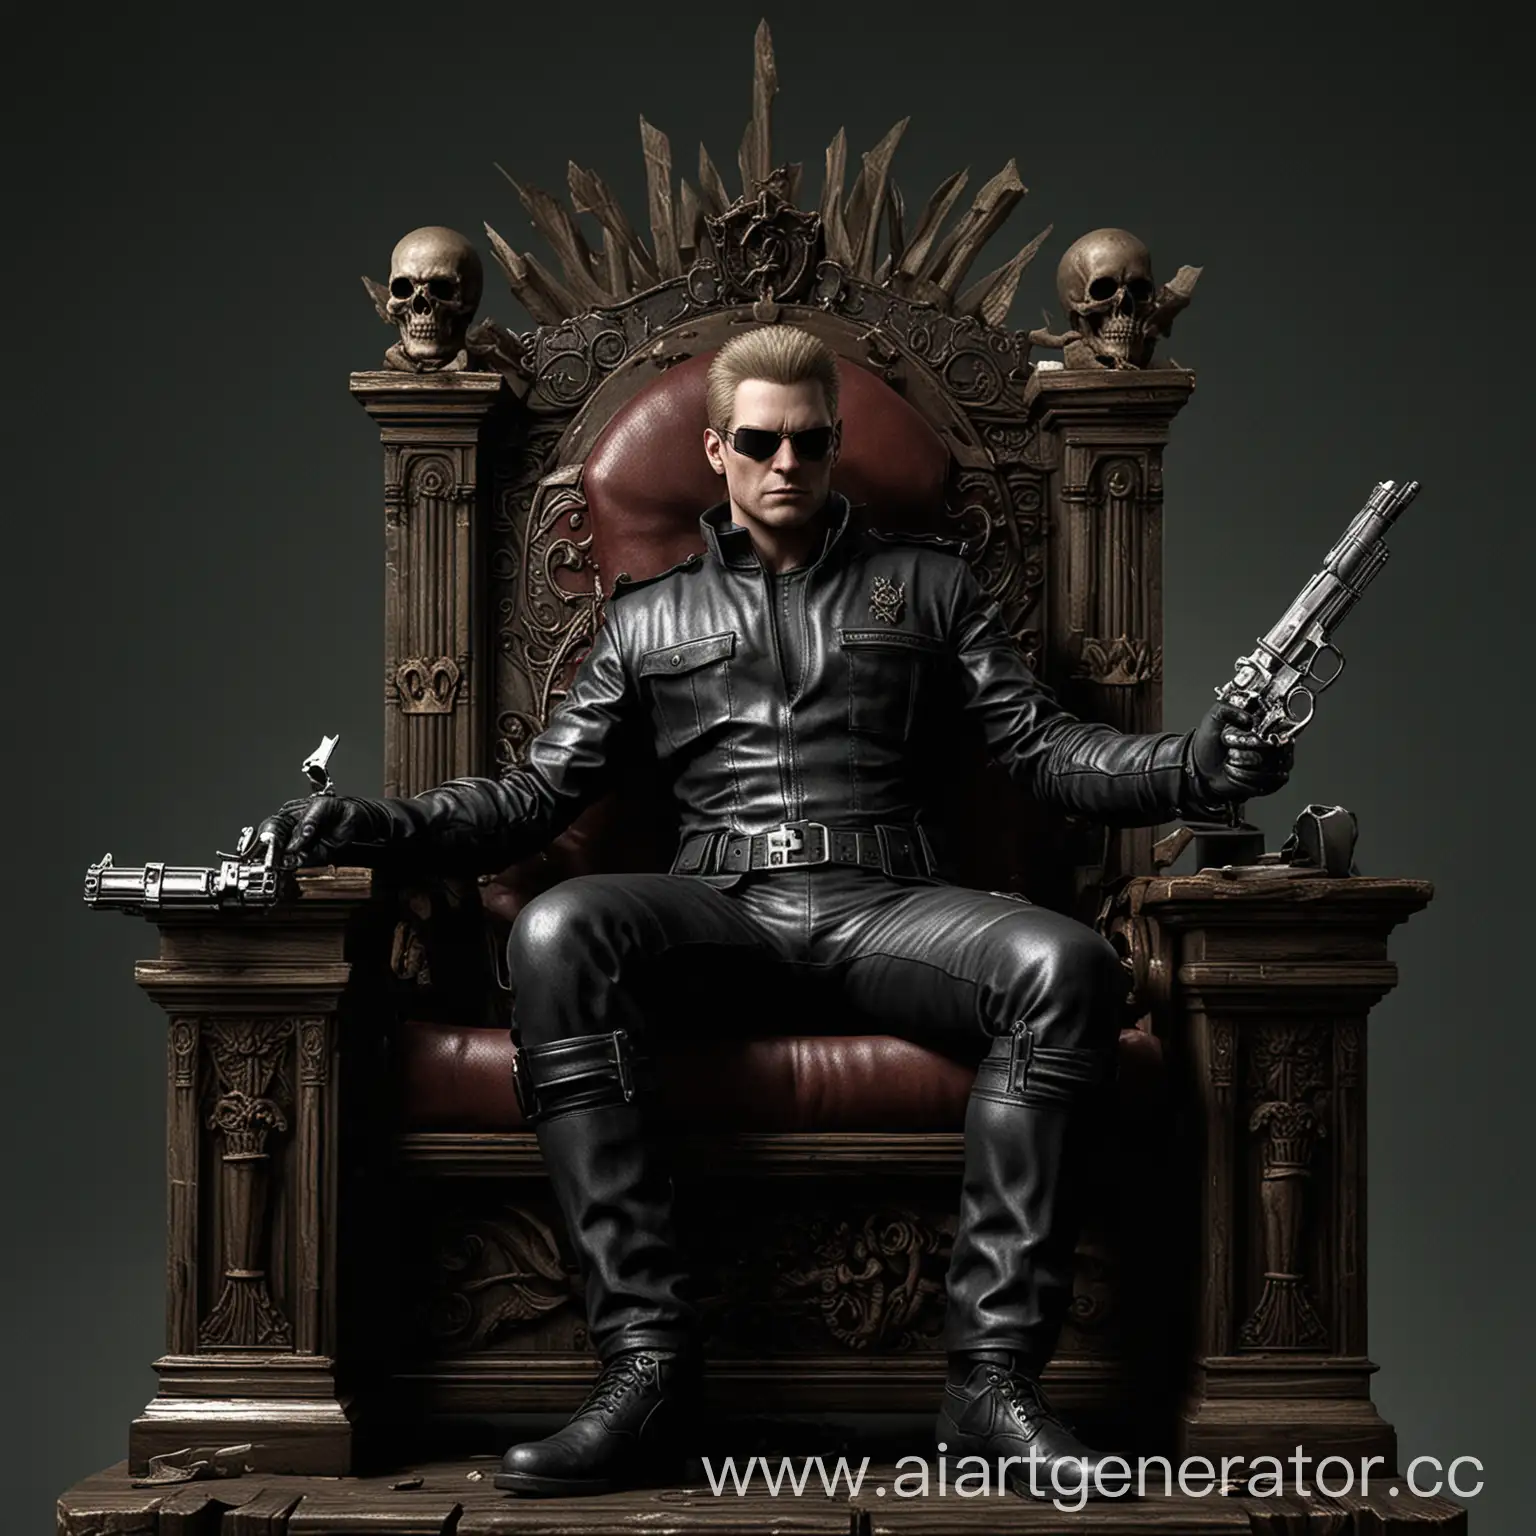 Resident-Evil-Game-Series-Character-Albert-Wesker-Seated-on-Throne-with-Revolver-and-Skull